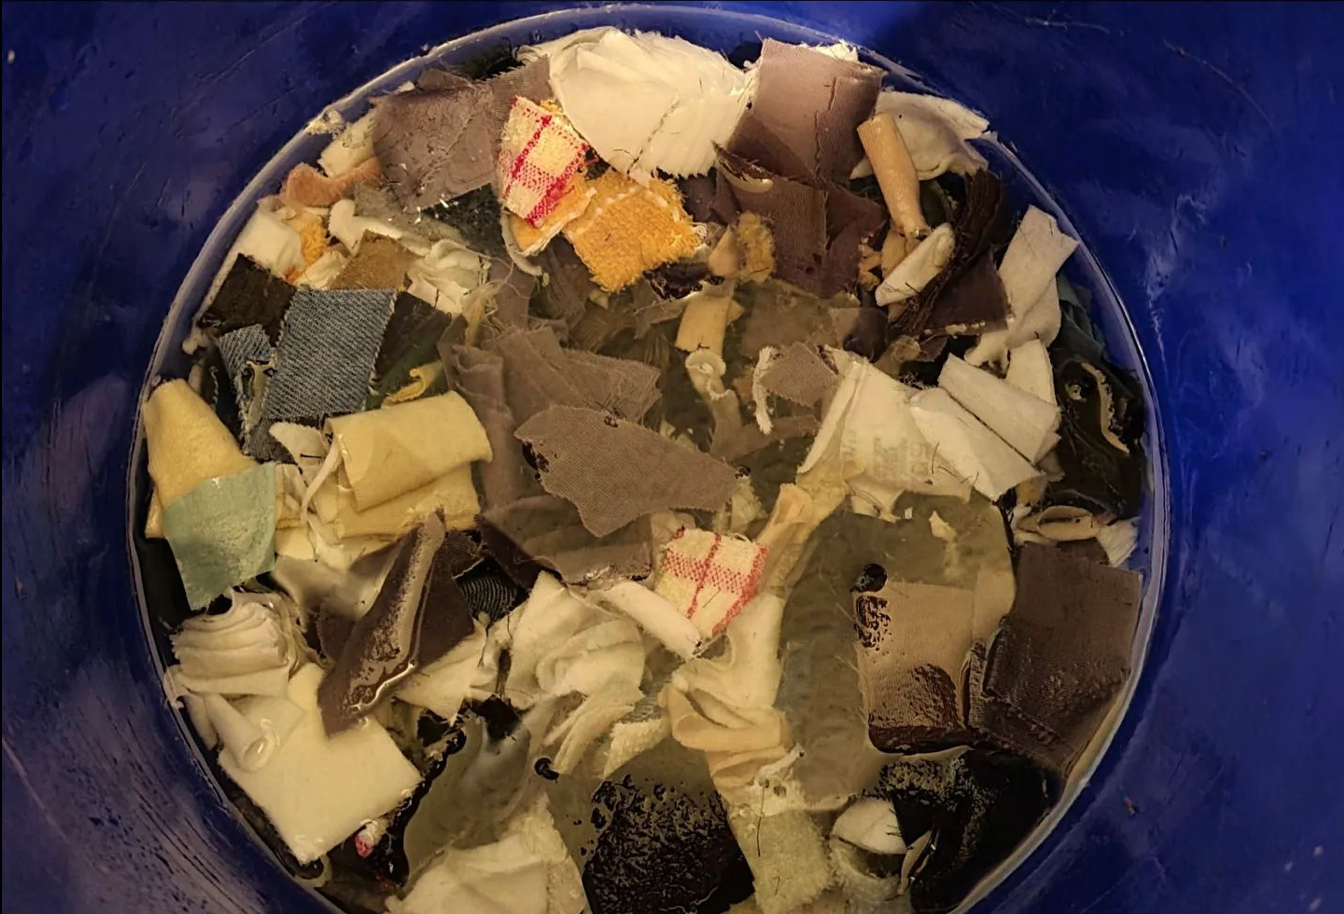  Soaking cotton fabric scraps for the next batch of pulp. 